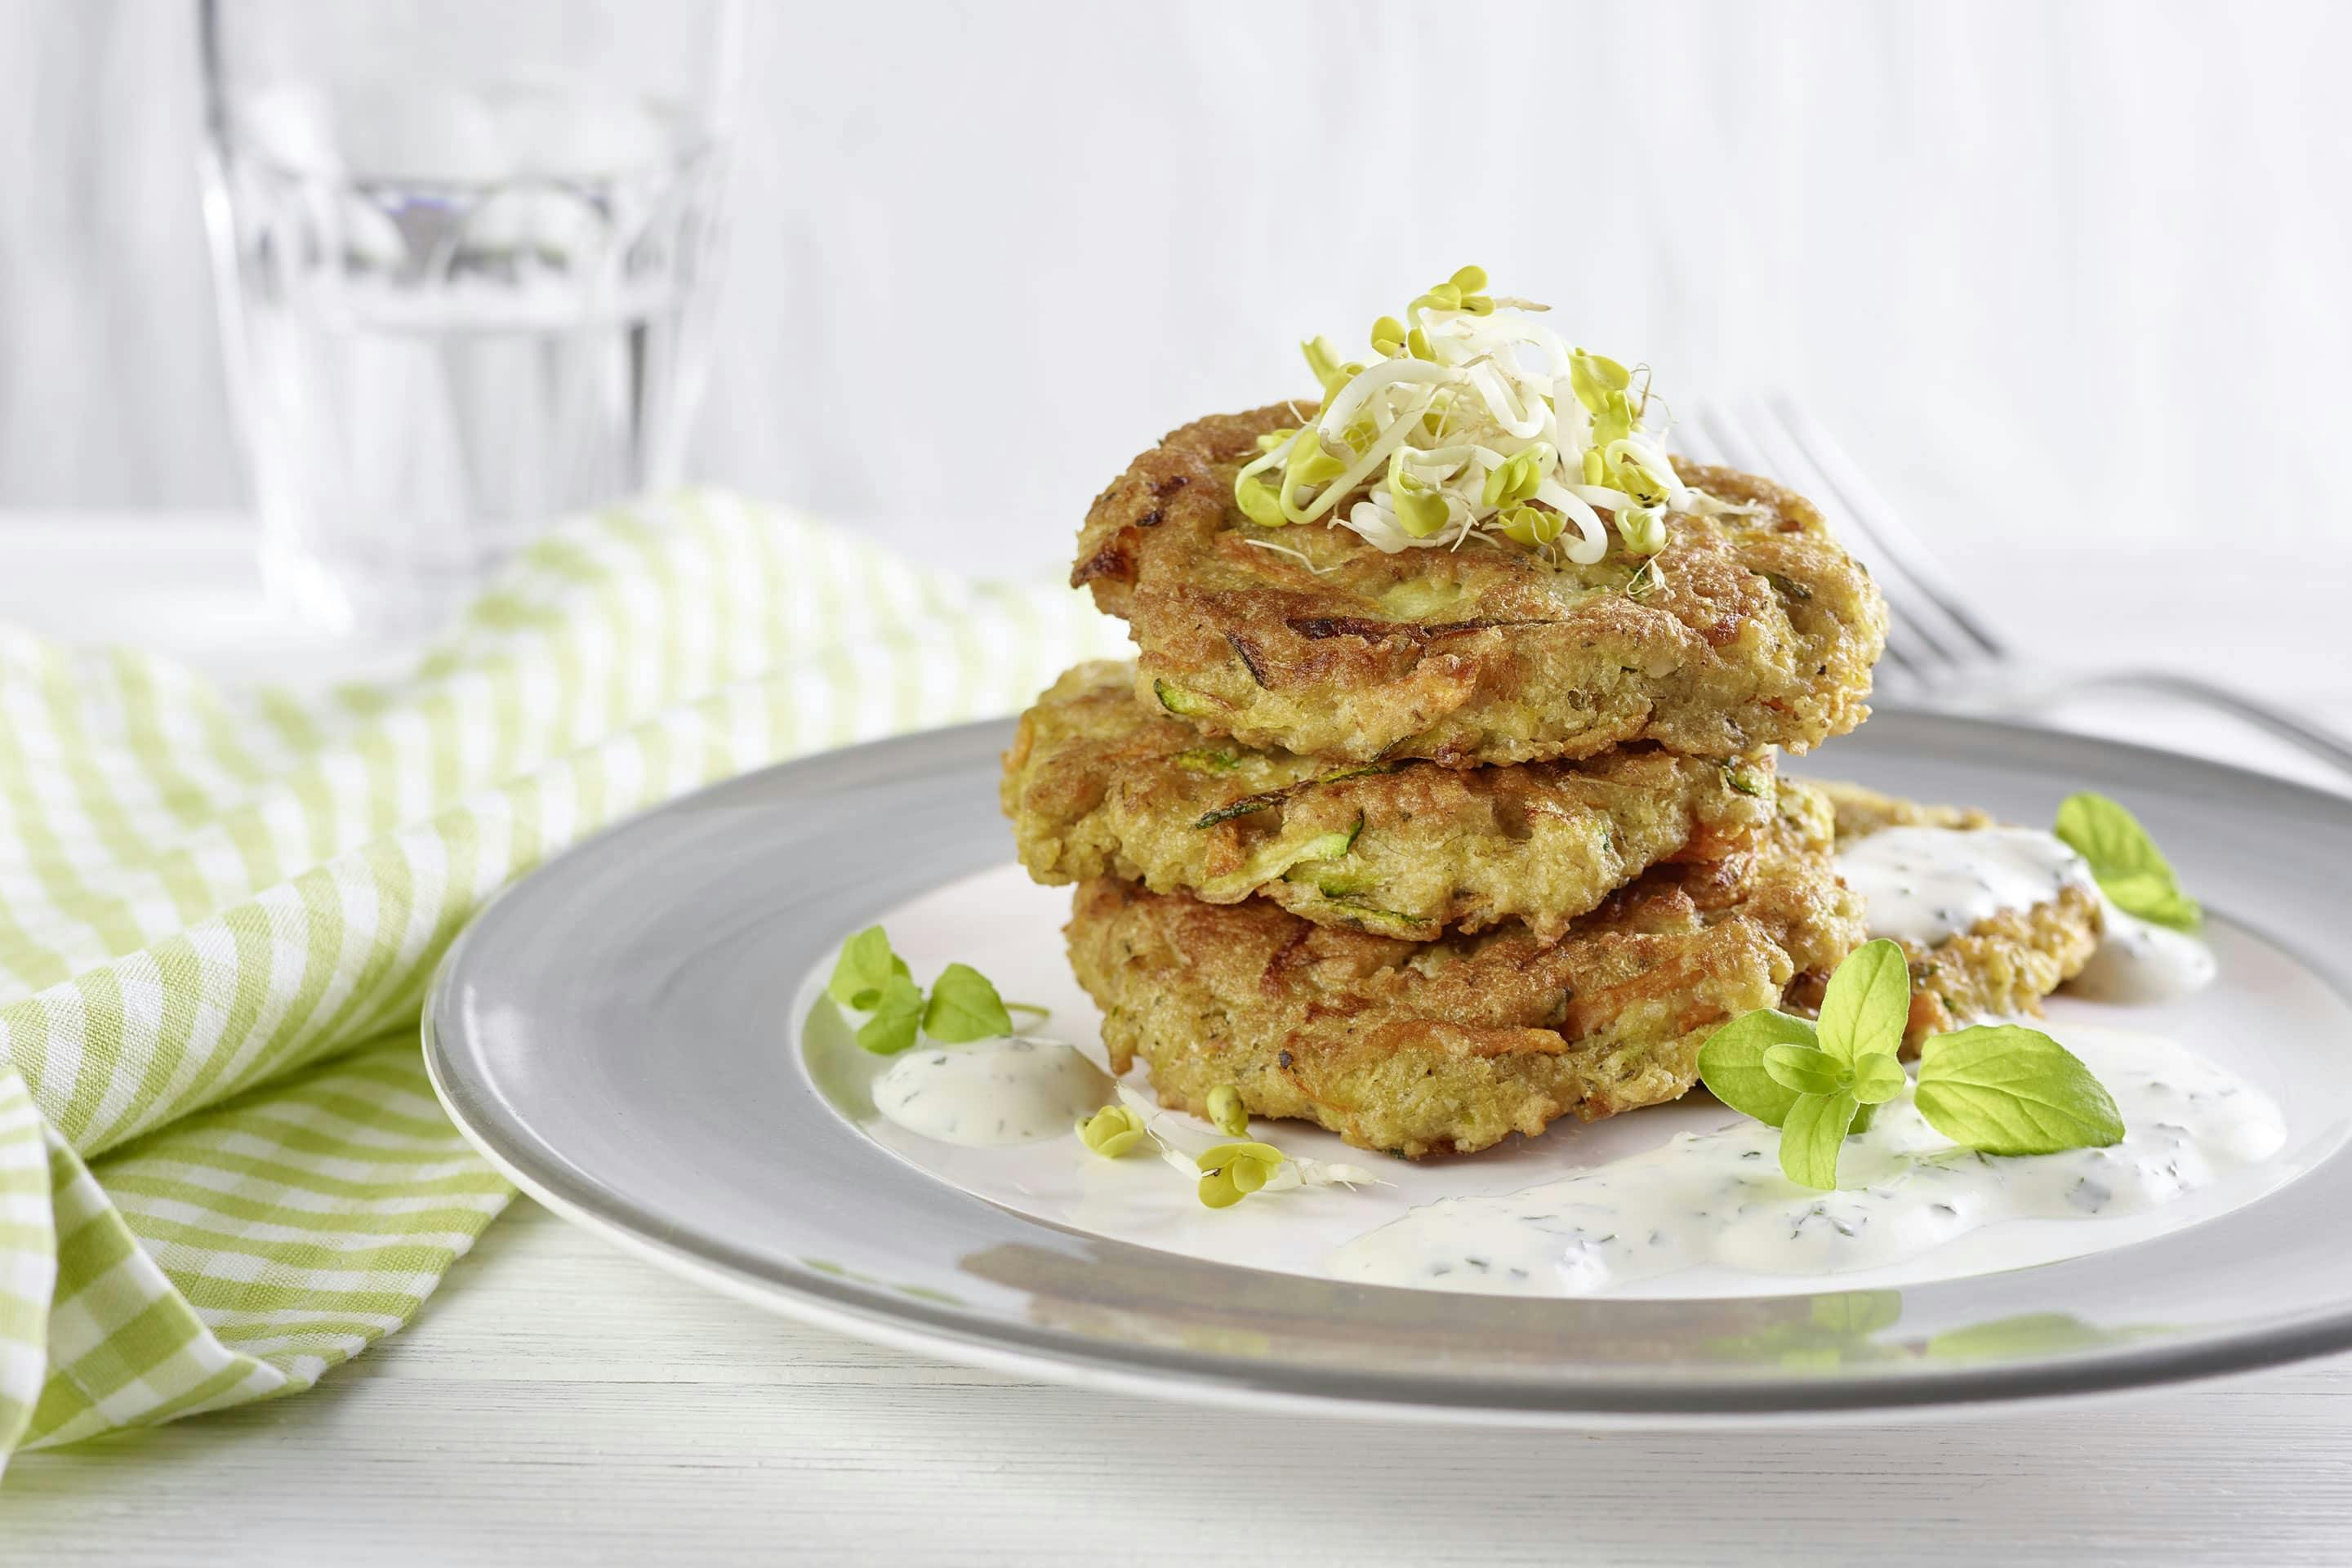 Carrot and zucchini patties with oatmeal and marjoram prepared on a plate with a gray rim and a green checkered napkin